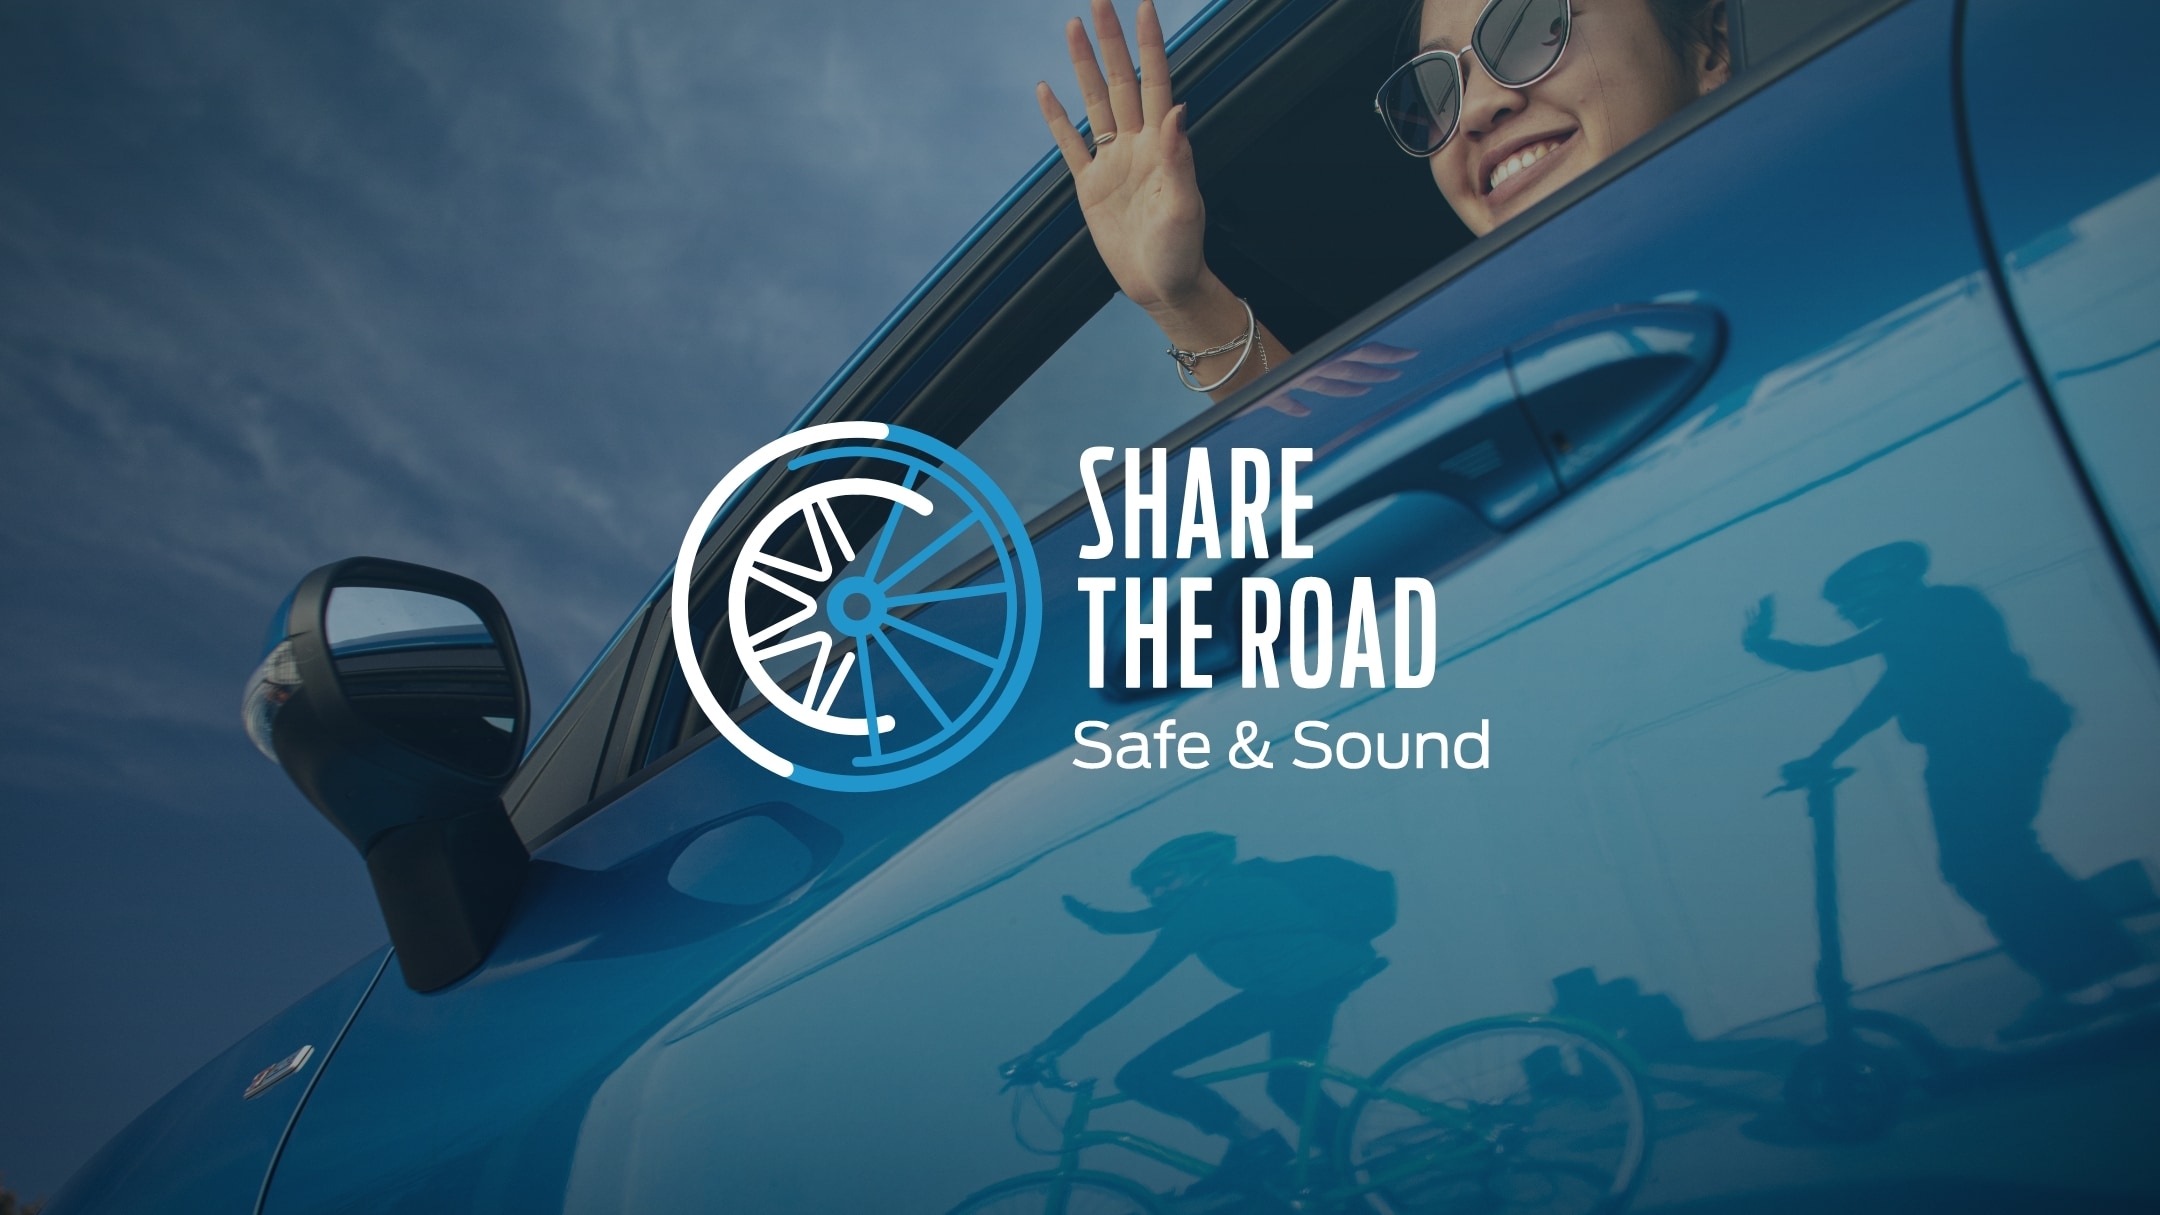 Share the road logo